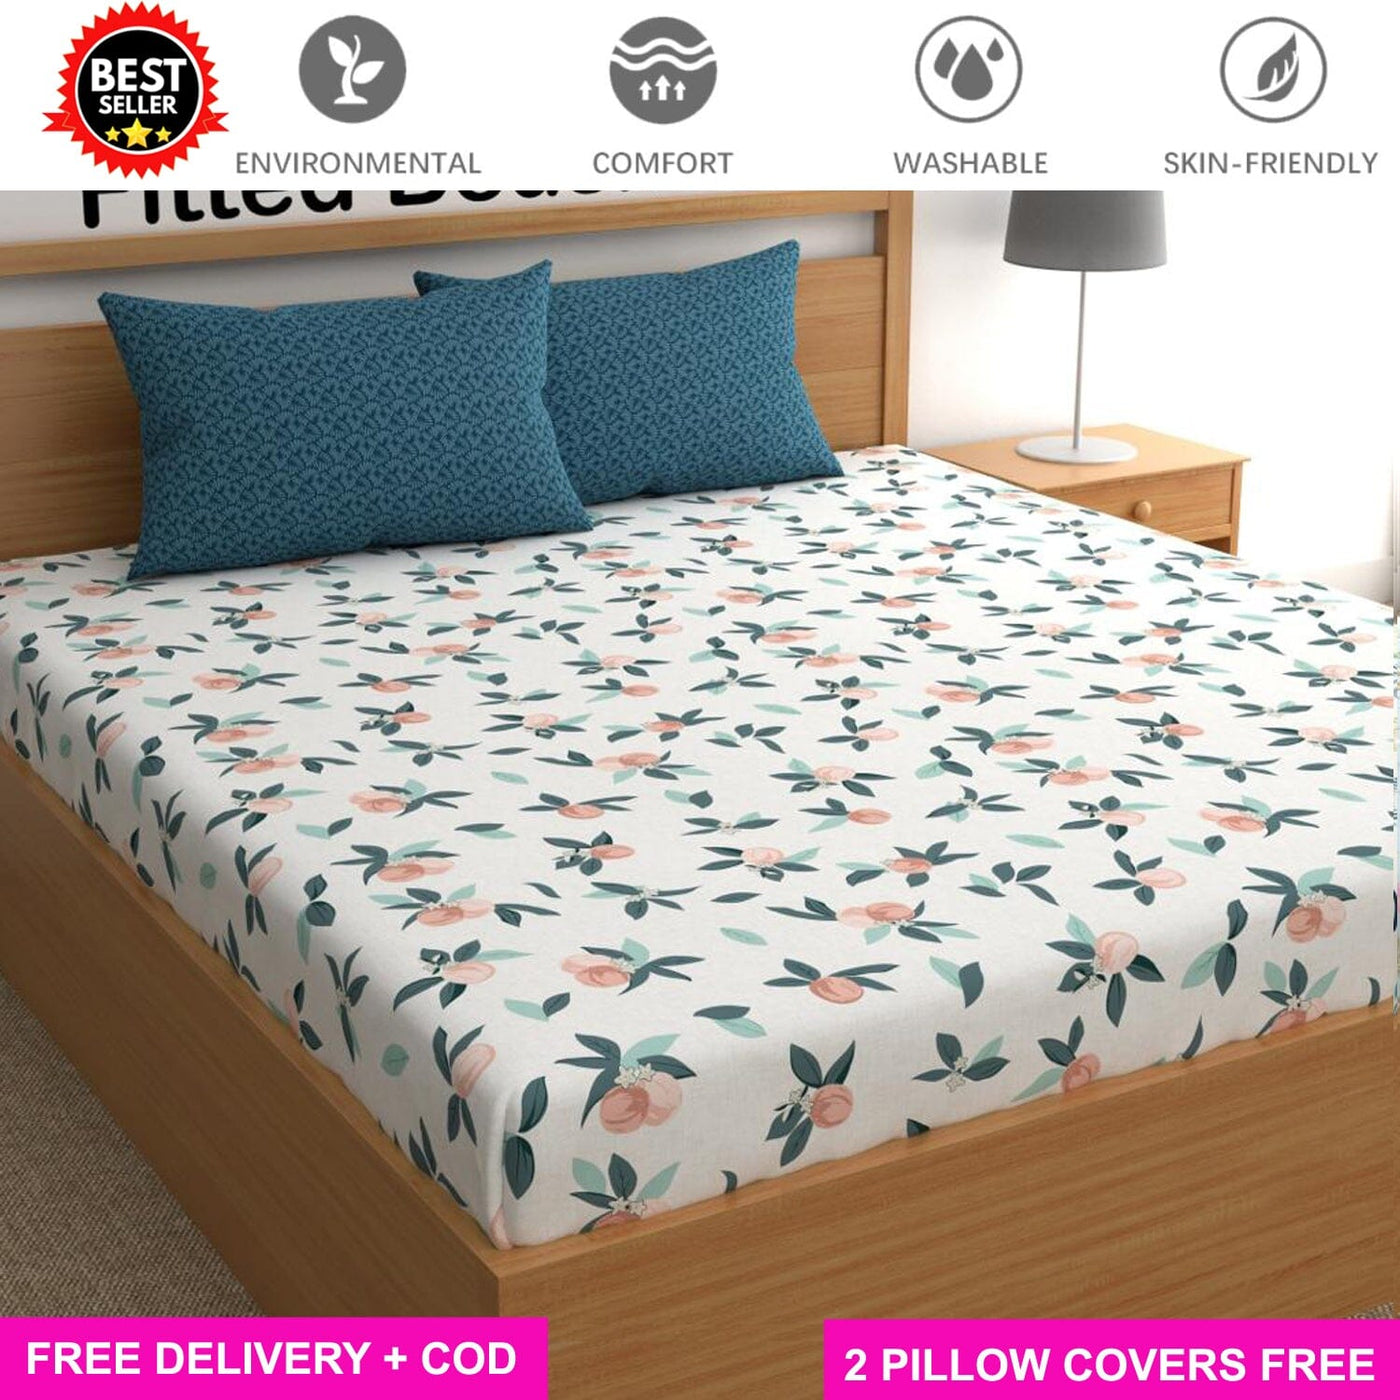 Cotton Elastic Fitted Bedsheet with 2 Pillow Covers - Fits with any Beds & Mattresses Great Happy IN Blue Buds Contrast KING SIZE 